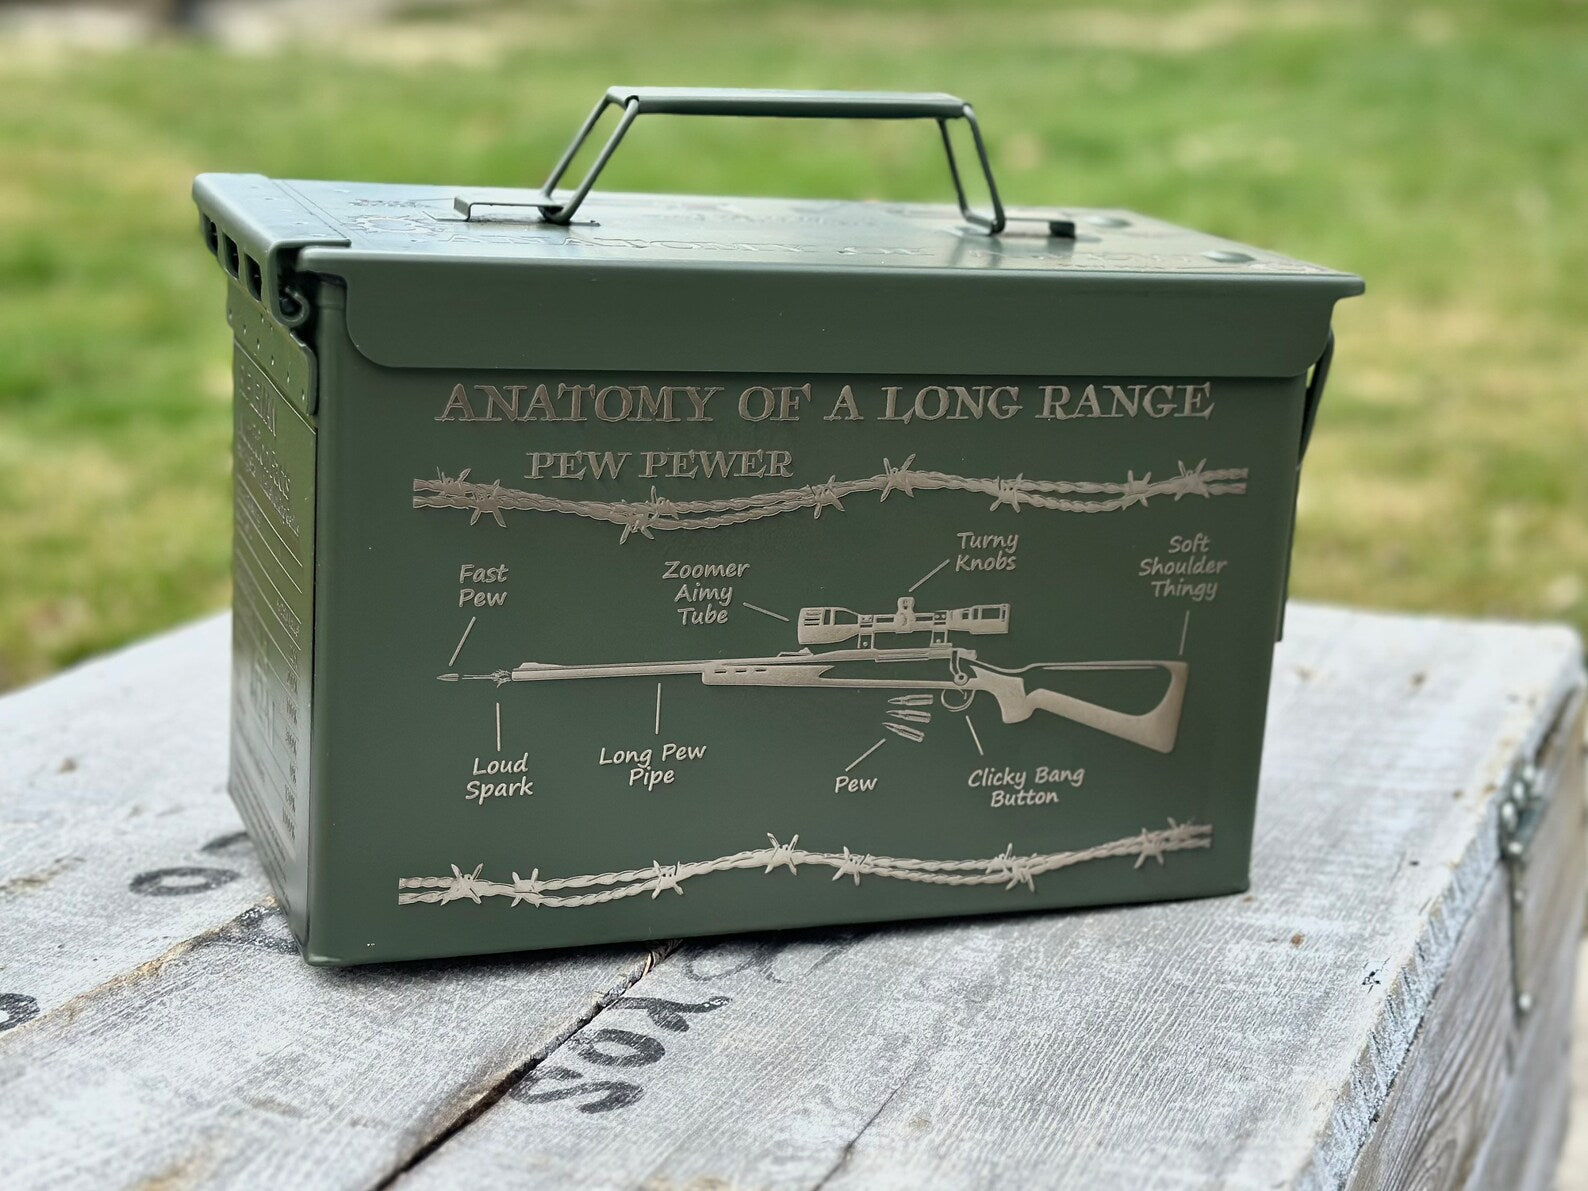 Anatomy Of A Pew- Customized 50 cal ammo can laser engraved on all sides